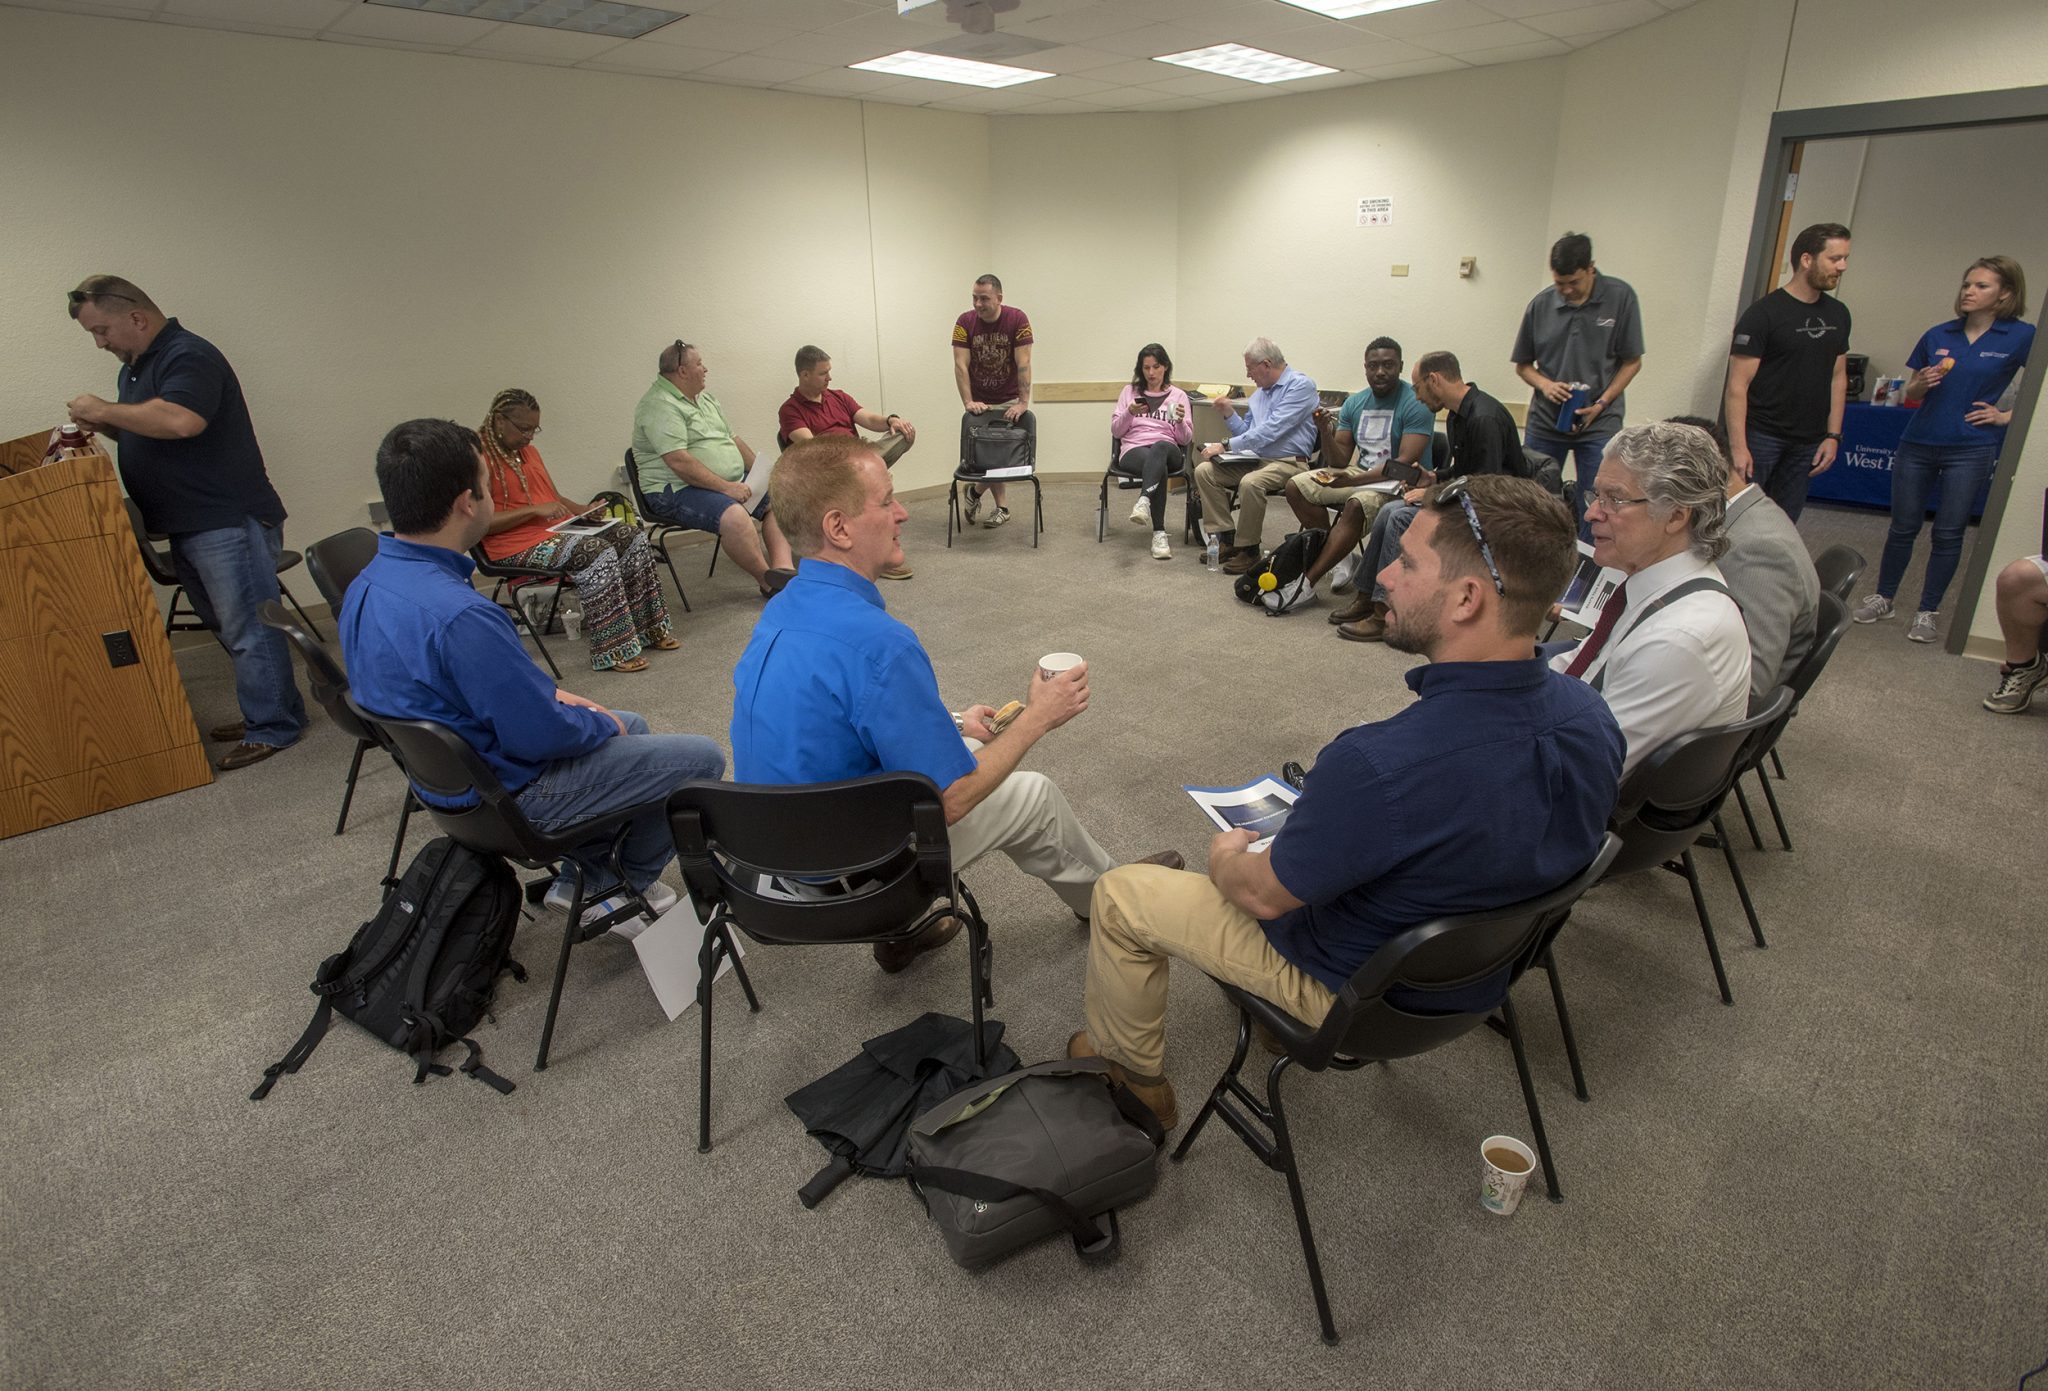 The Military and Veterans Resource Center at the University of West Florida hosting an entrepreneurial class with the Veterans Florida program.